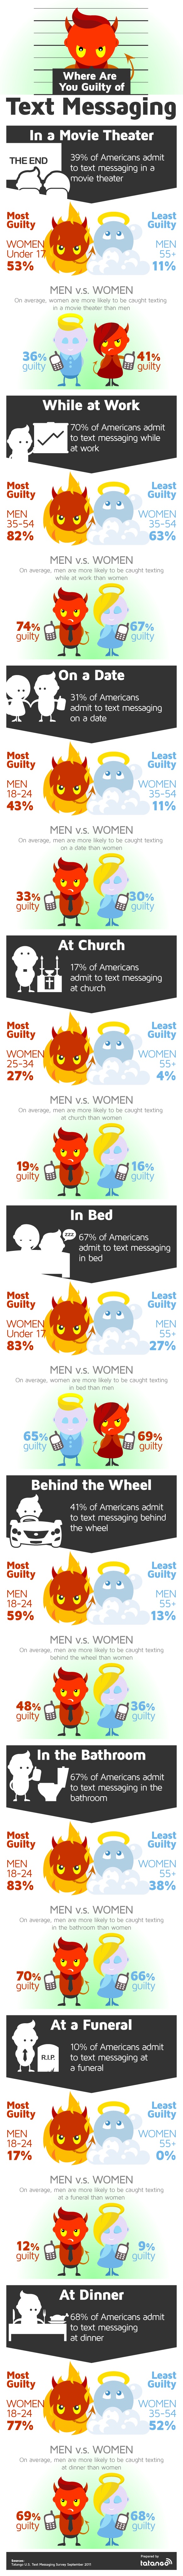 Where Are You Guilty of Text Messaging Infographic Tatango